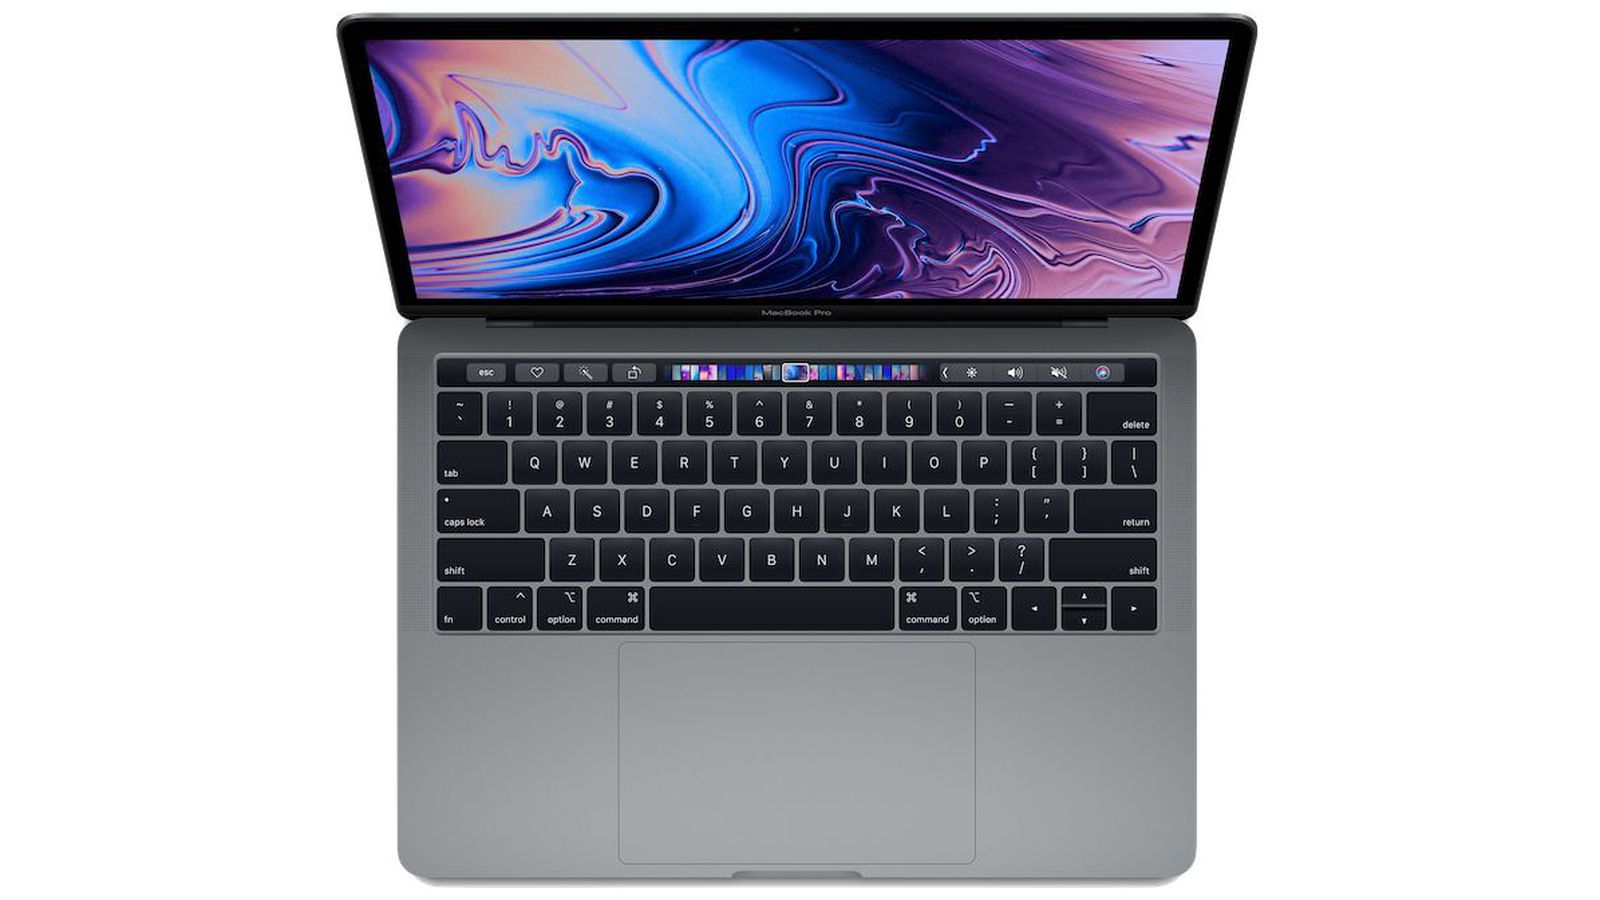 Upcoming 13-Inch MacBook Pro Models to Use Intel's 10th-Generation 